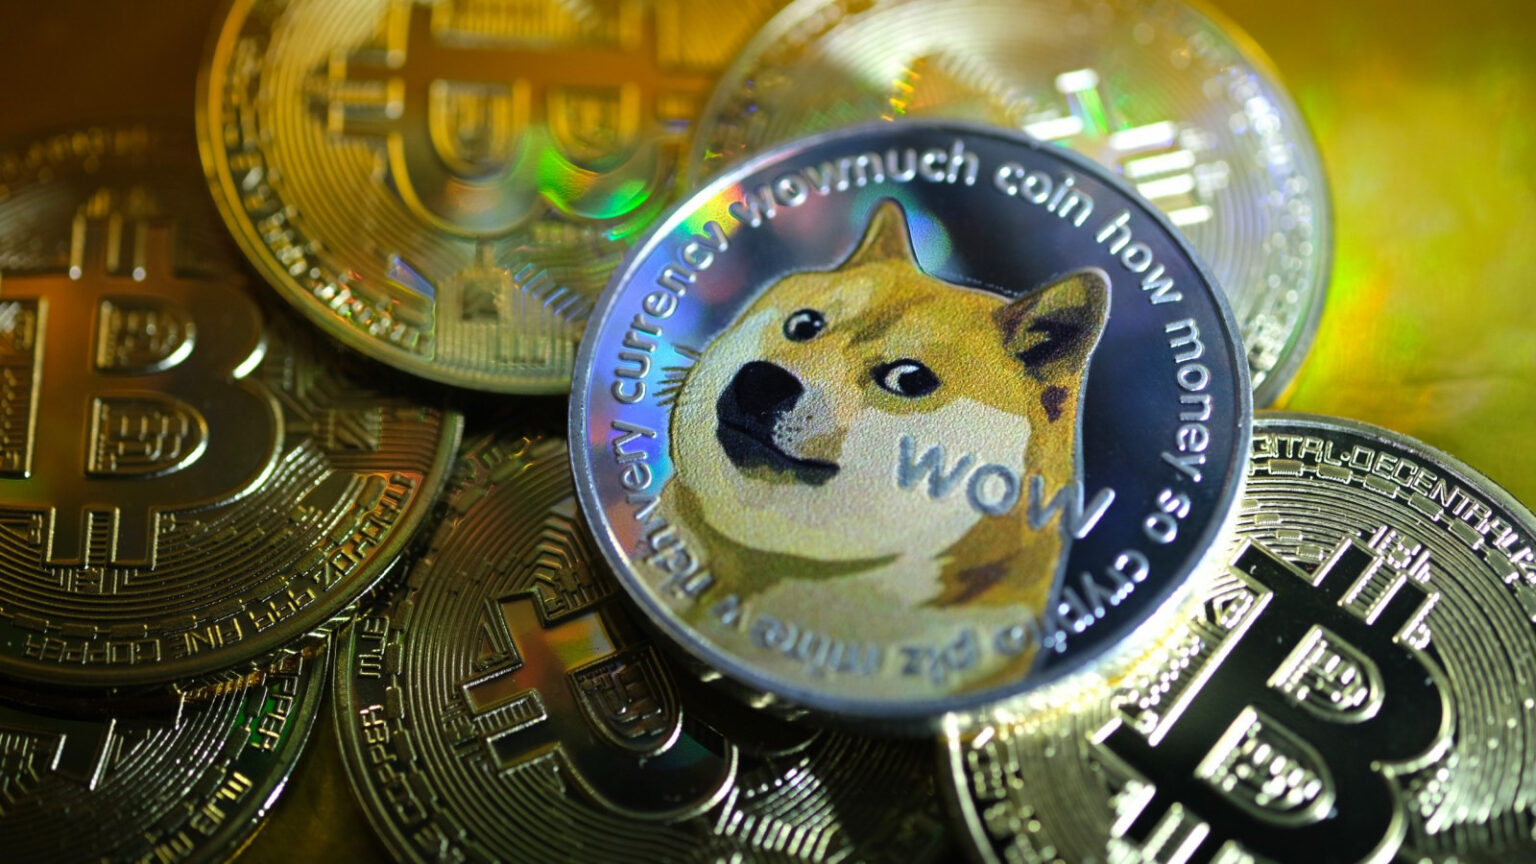 Why is dogecoin stock skyrocketing? Peer inside Elon Musk's stated promotions of the cryptocurrency, and discover whether it will go to the moon.